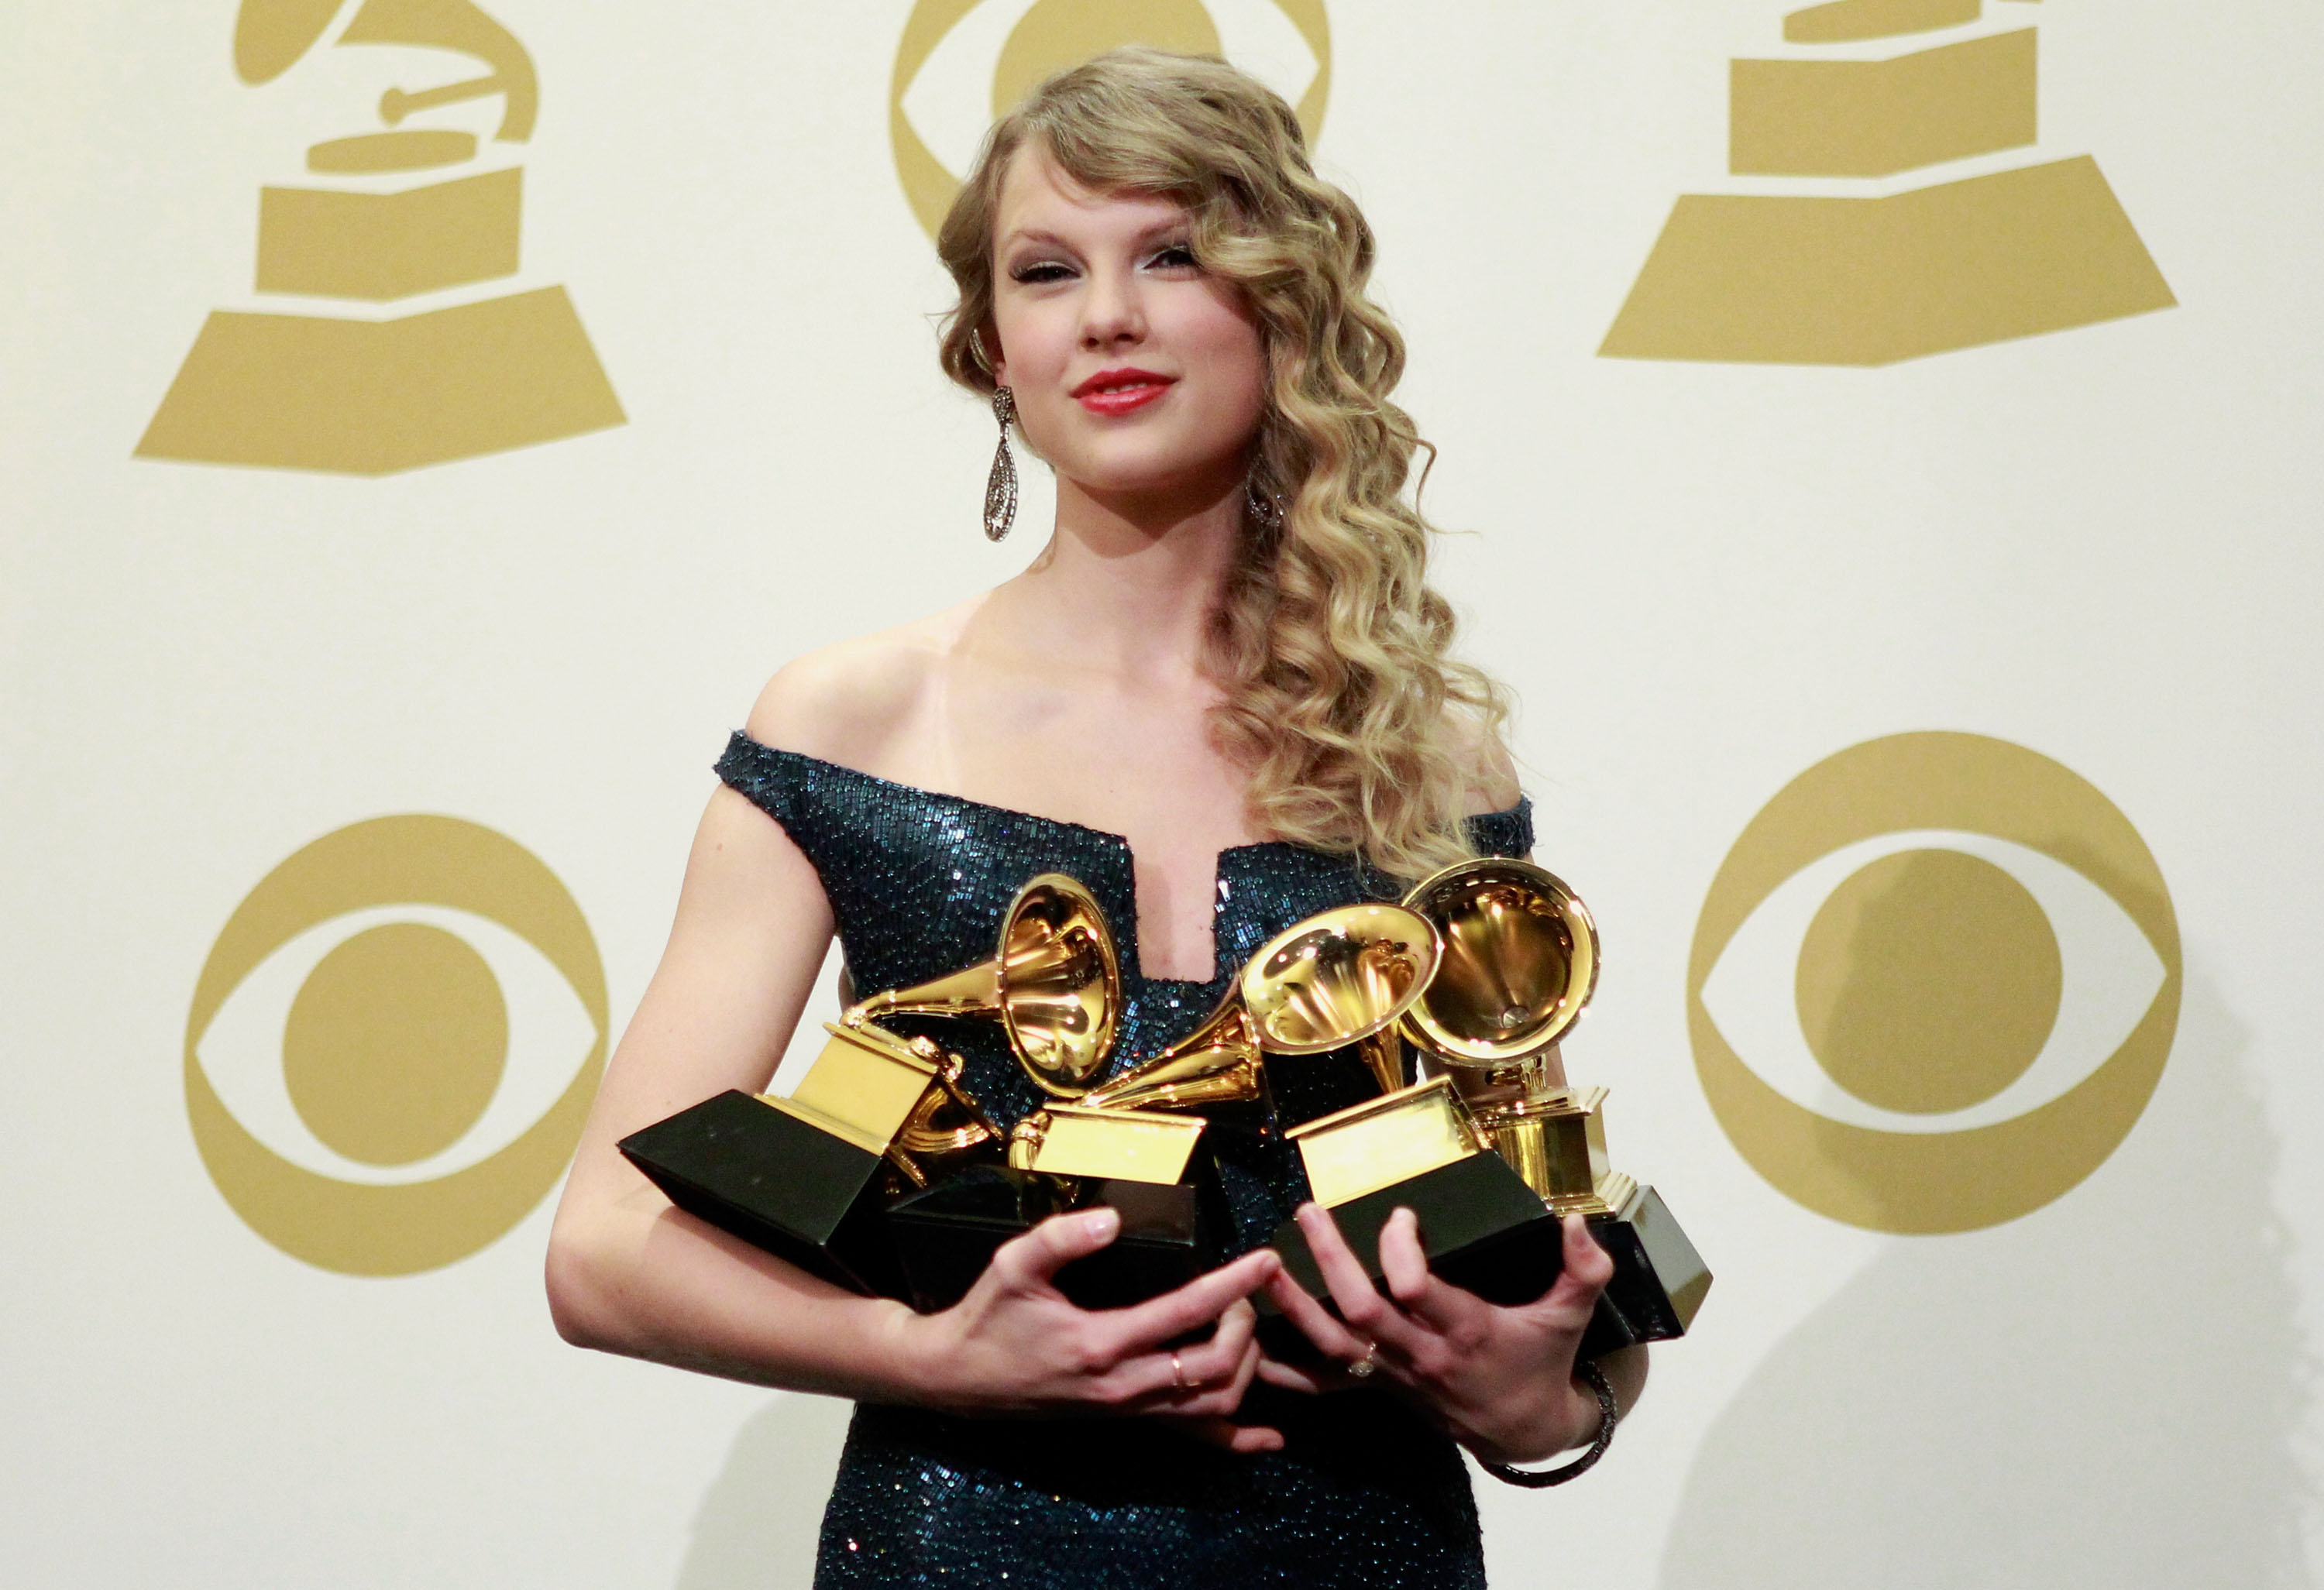 Taylor Swift poses st the 52nd Annual GRAMMY Awards on January 31, 2010 in Los Angeles, California. 